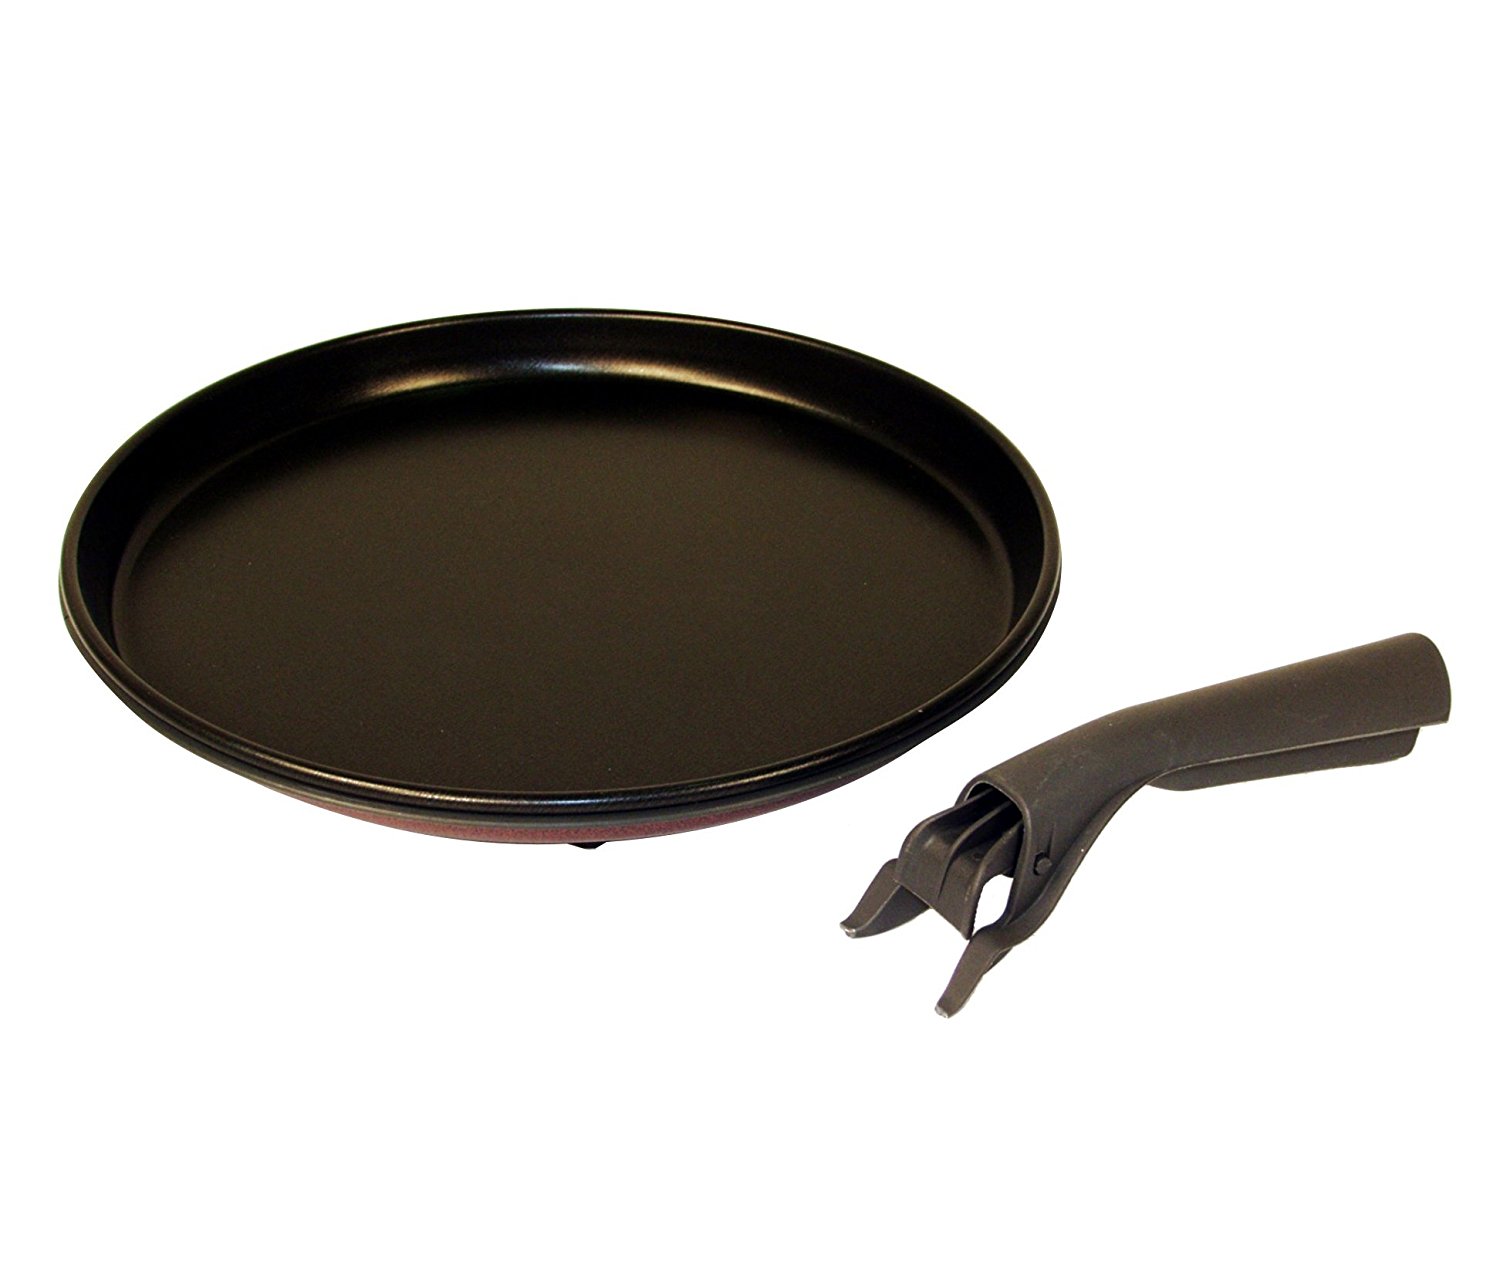 A Divided Frying Pan to Simplify Kitchen Multi-Tasking